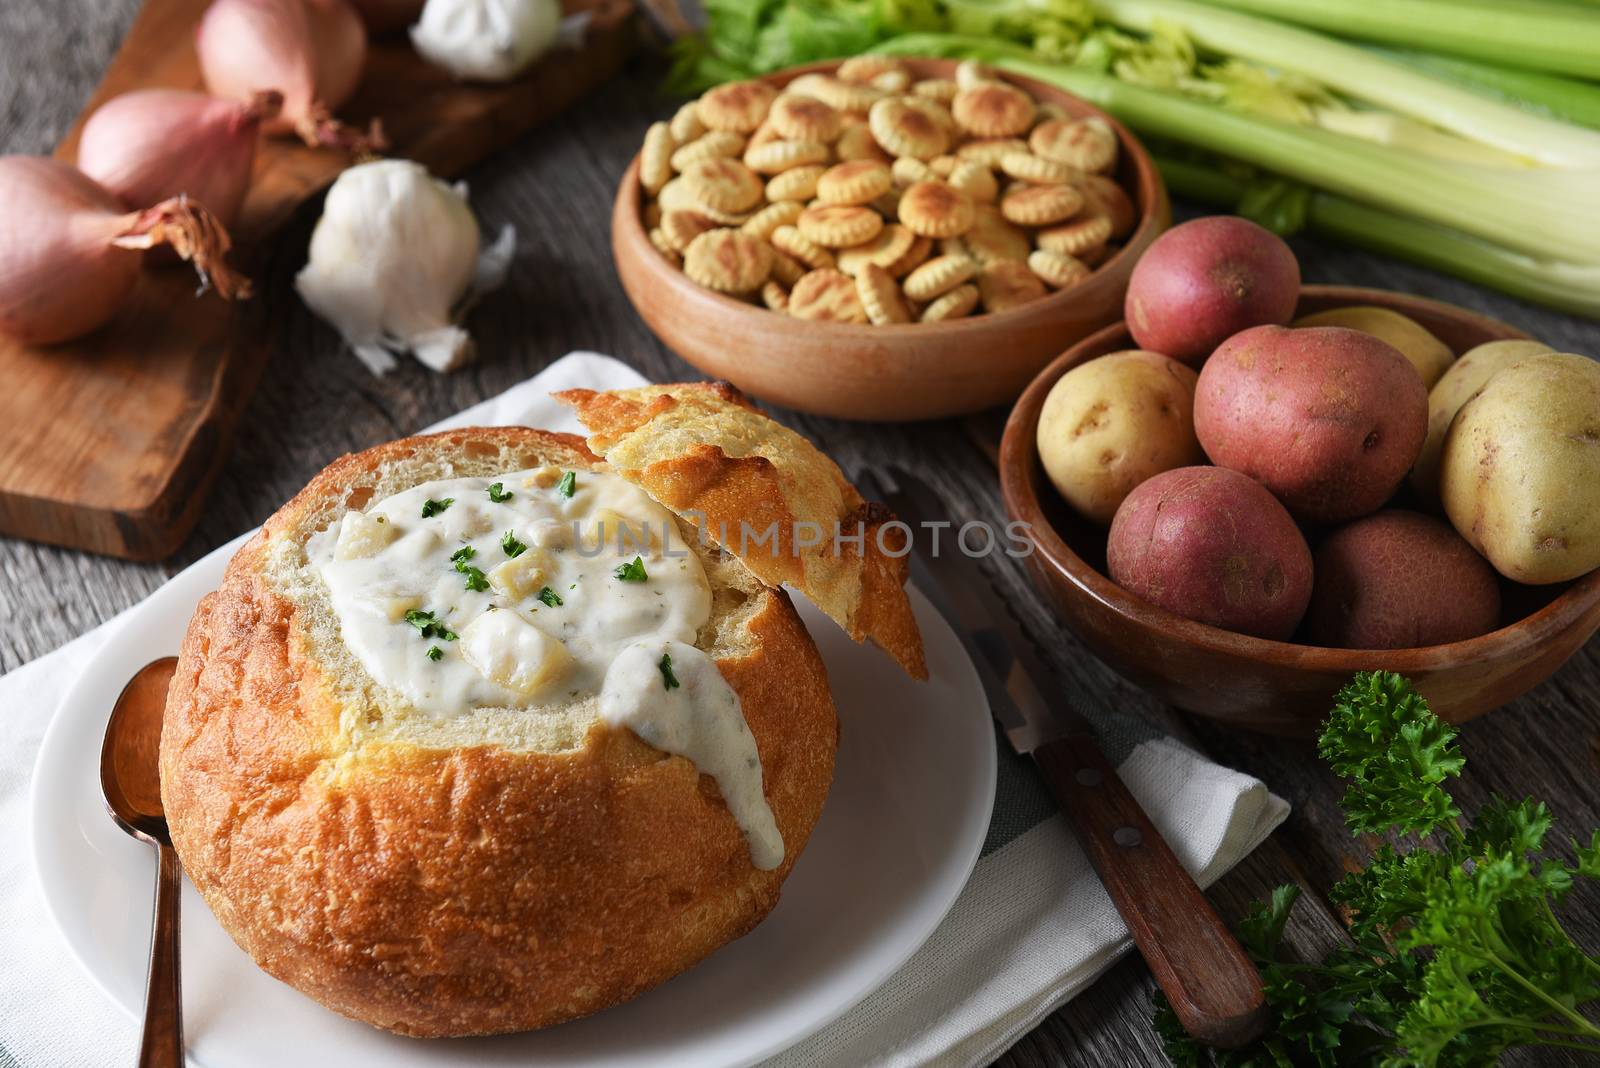 New England Clam Chowder: A bread bowl full of fresh homemade soup with crackers and ingredients.